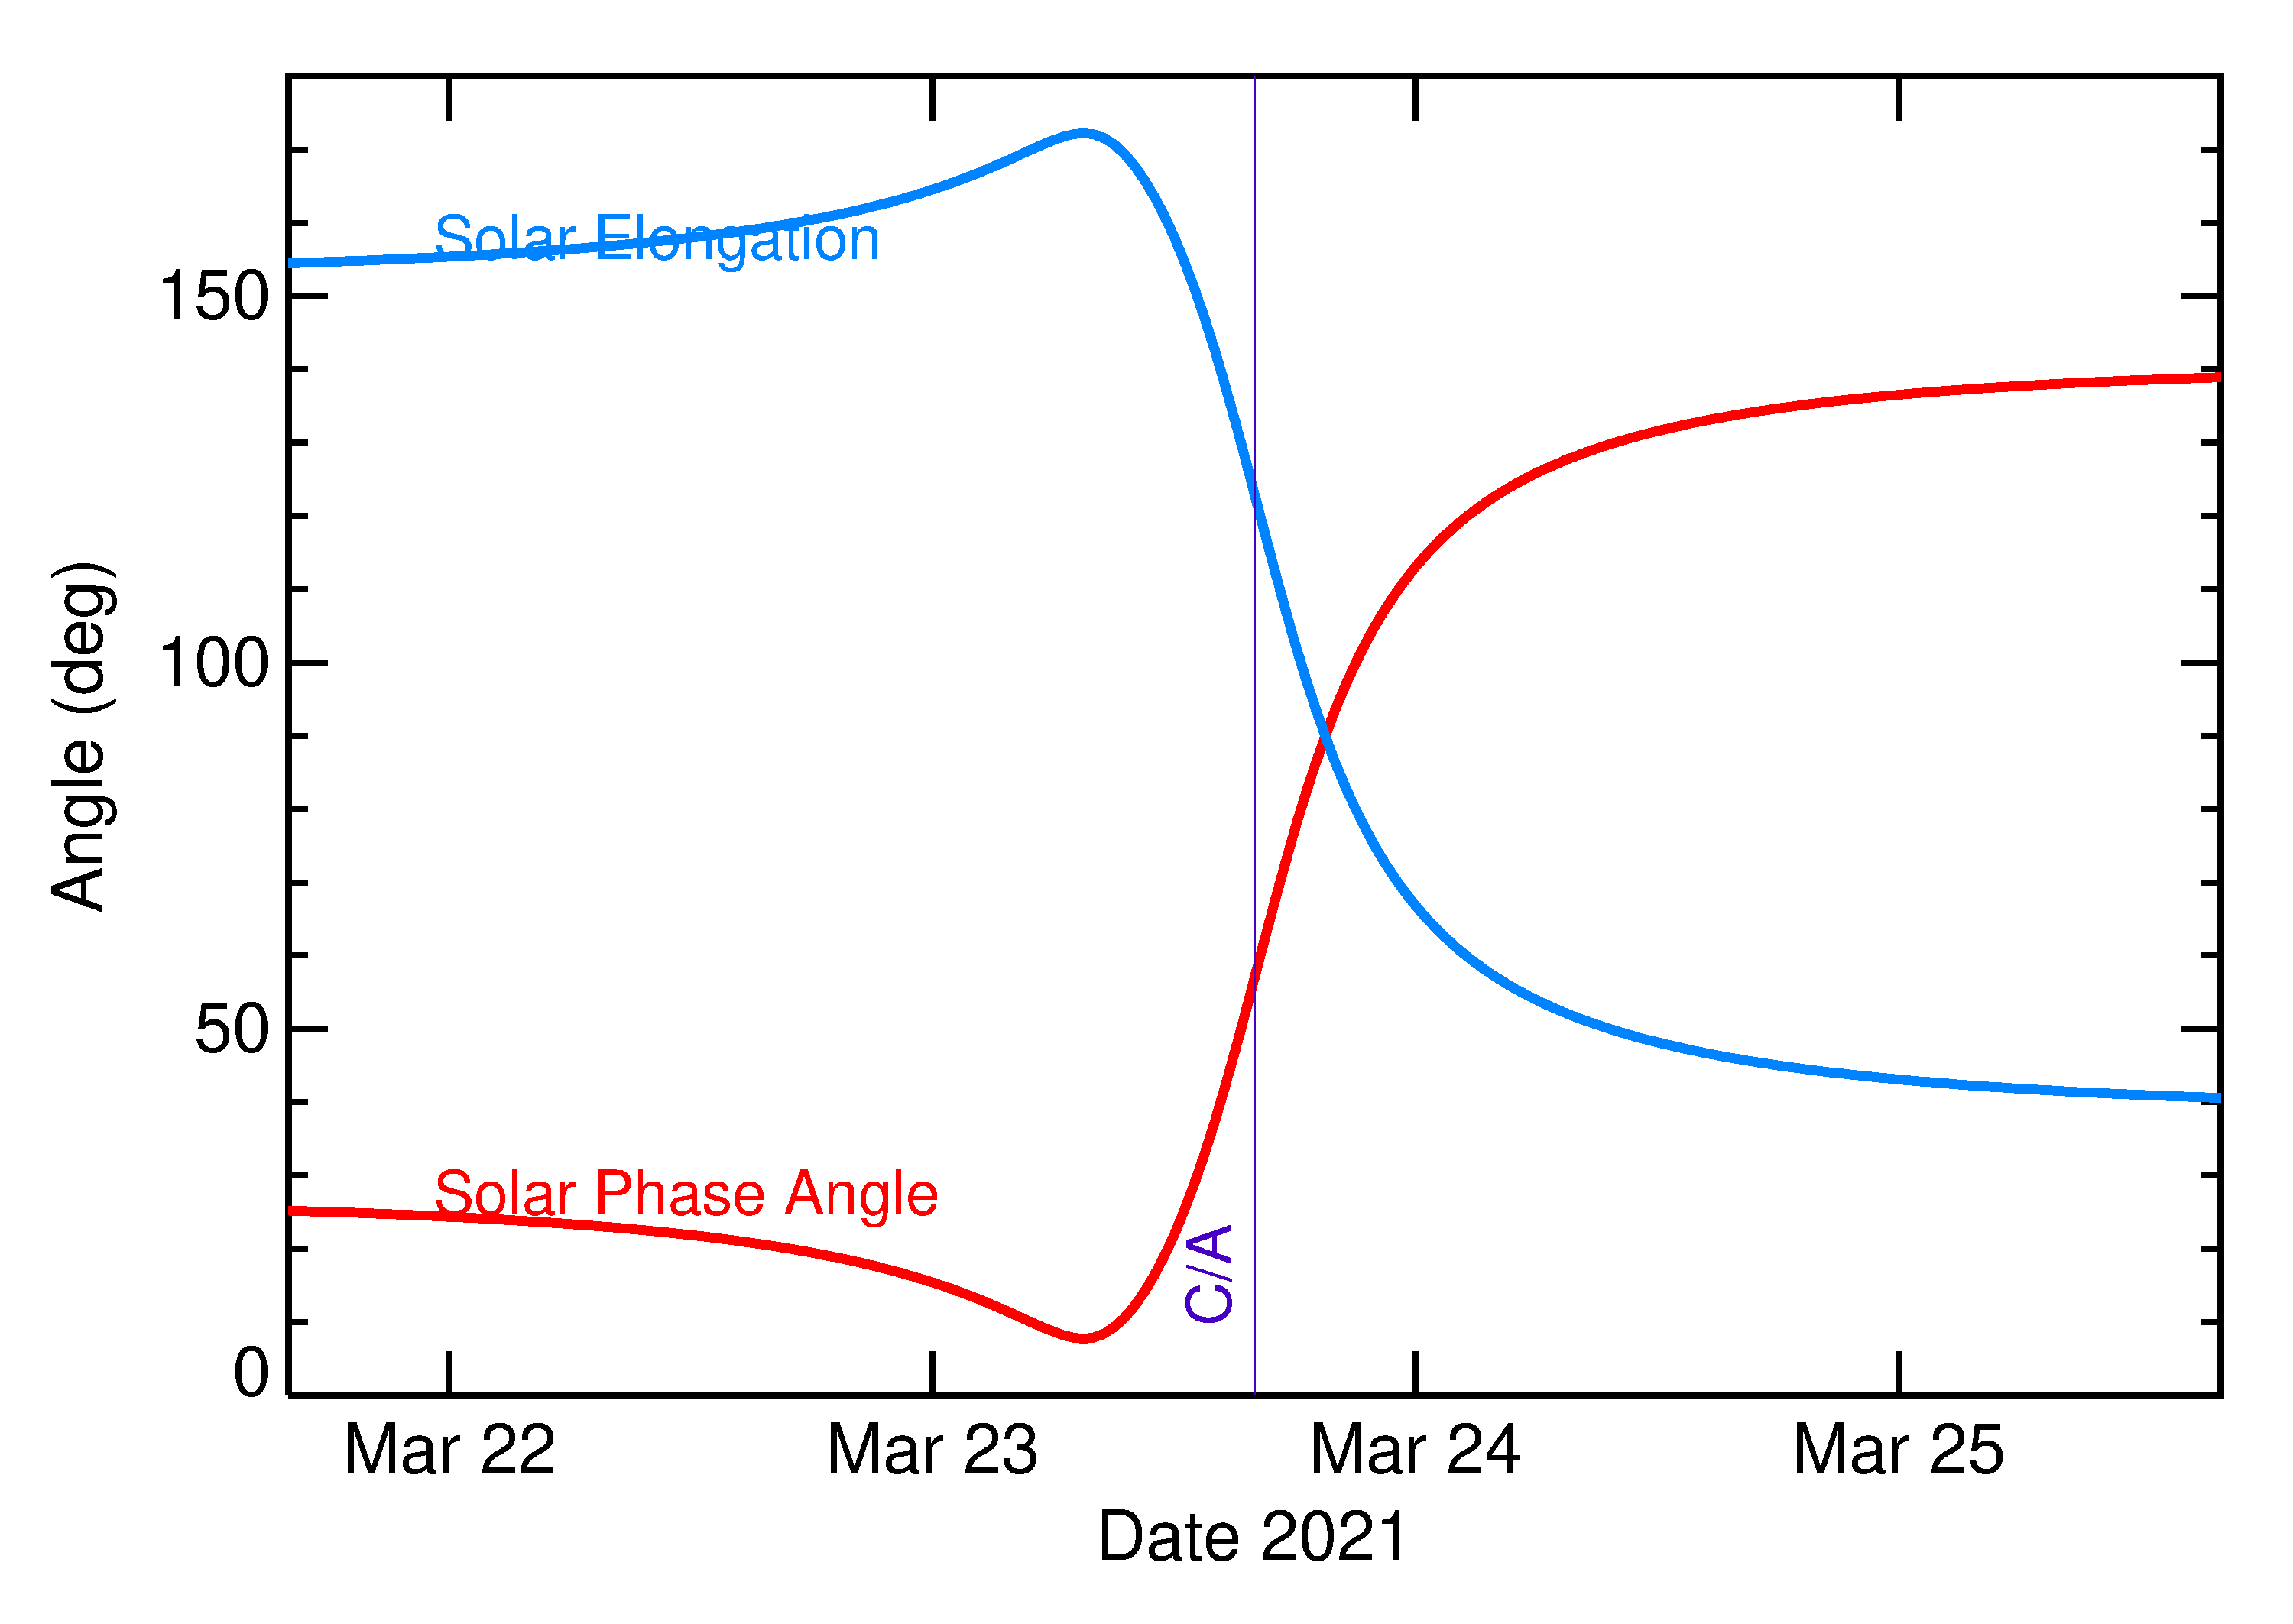 Solar Elongation and Solar Phase Angle of 2021 FH in the days around closest approach